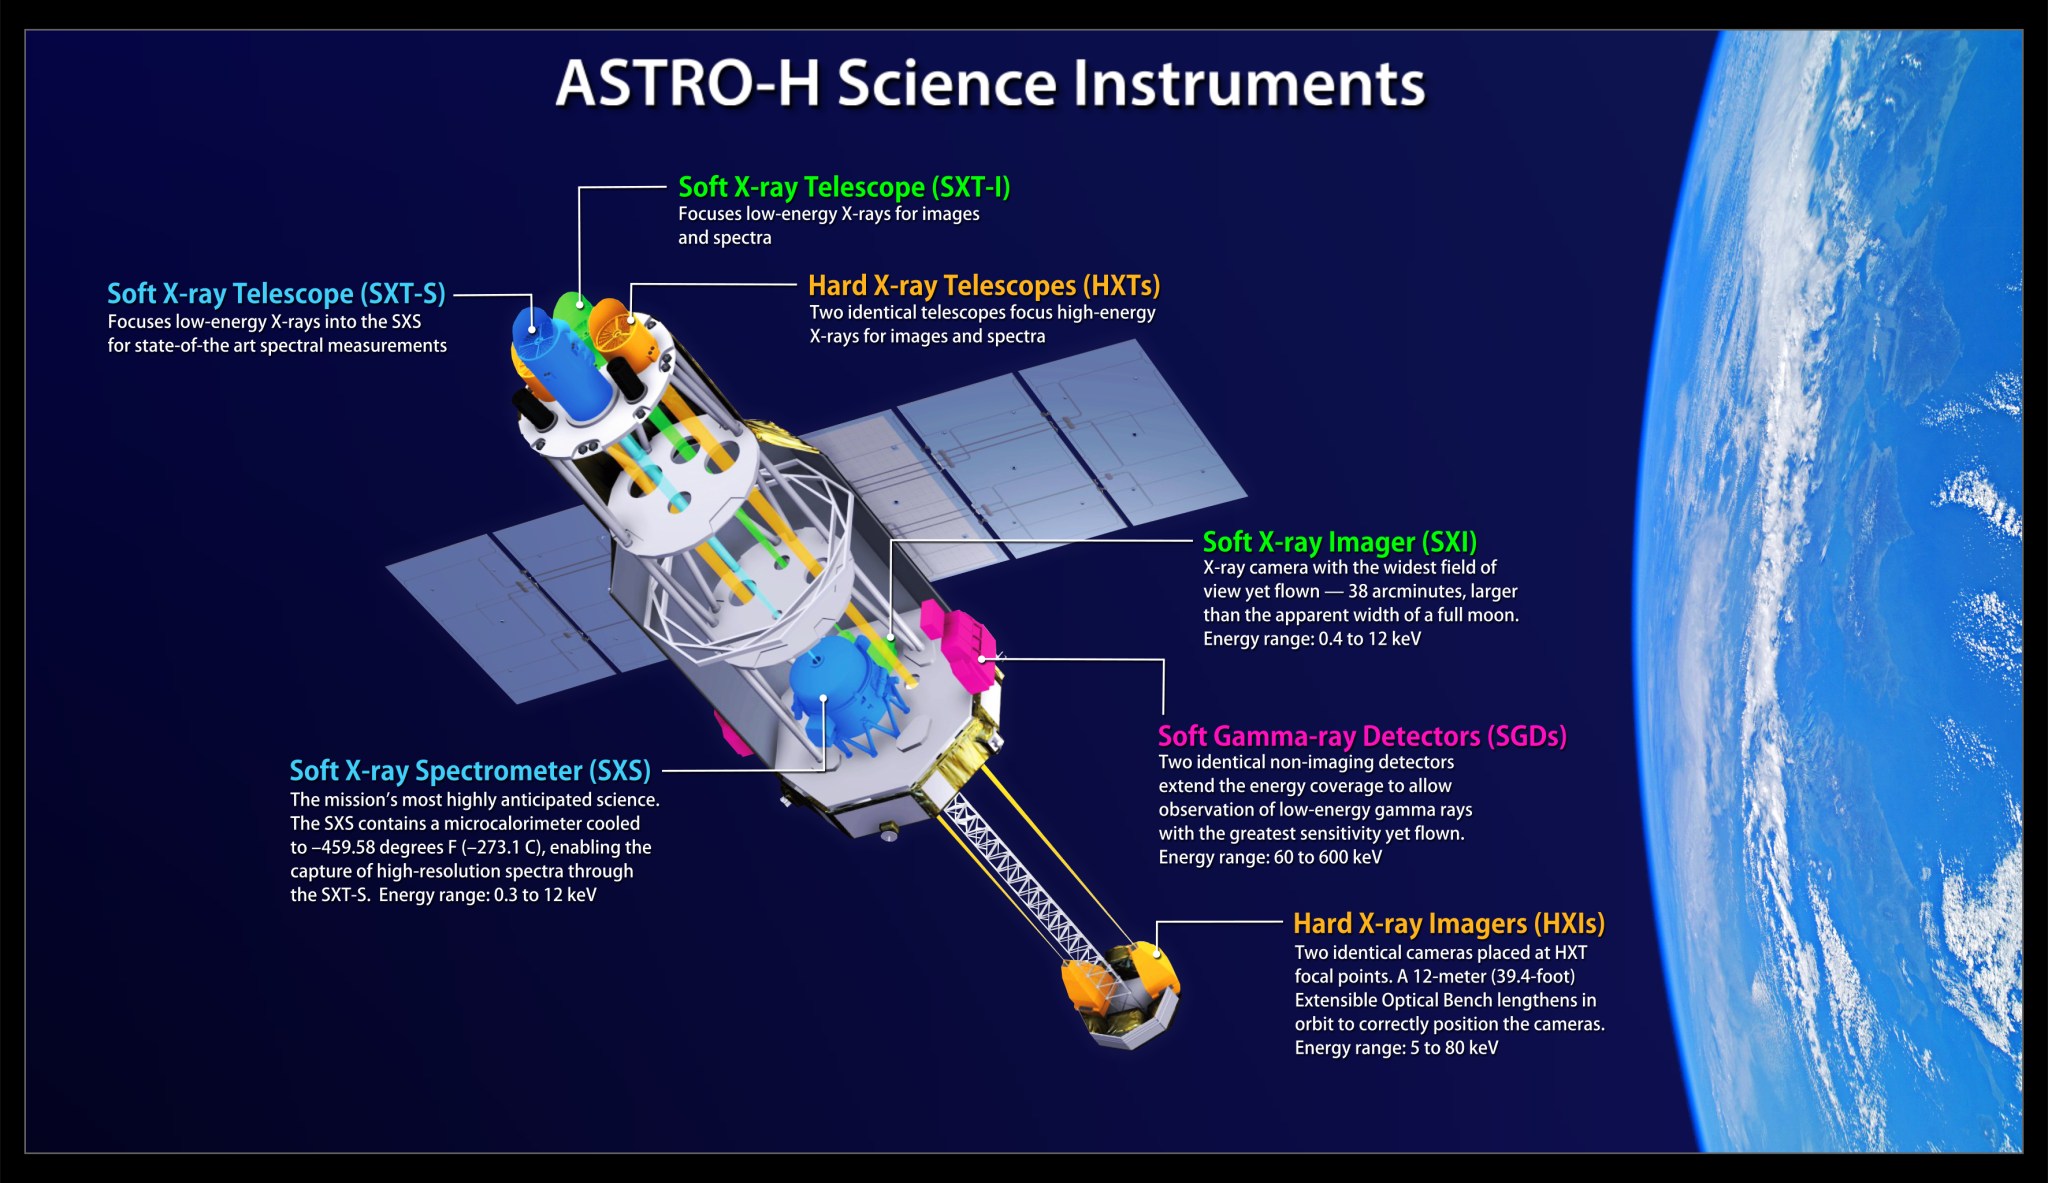 This illustration shows the locations and energy ranges of ASTRO-H science instruments and their associated telescopes. 